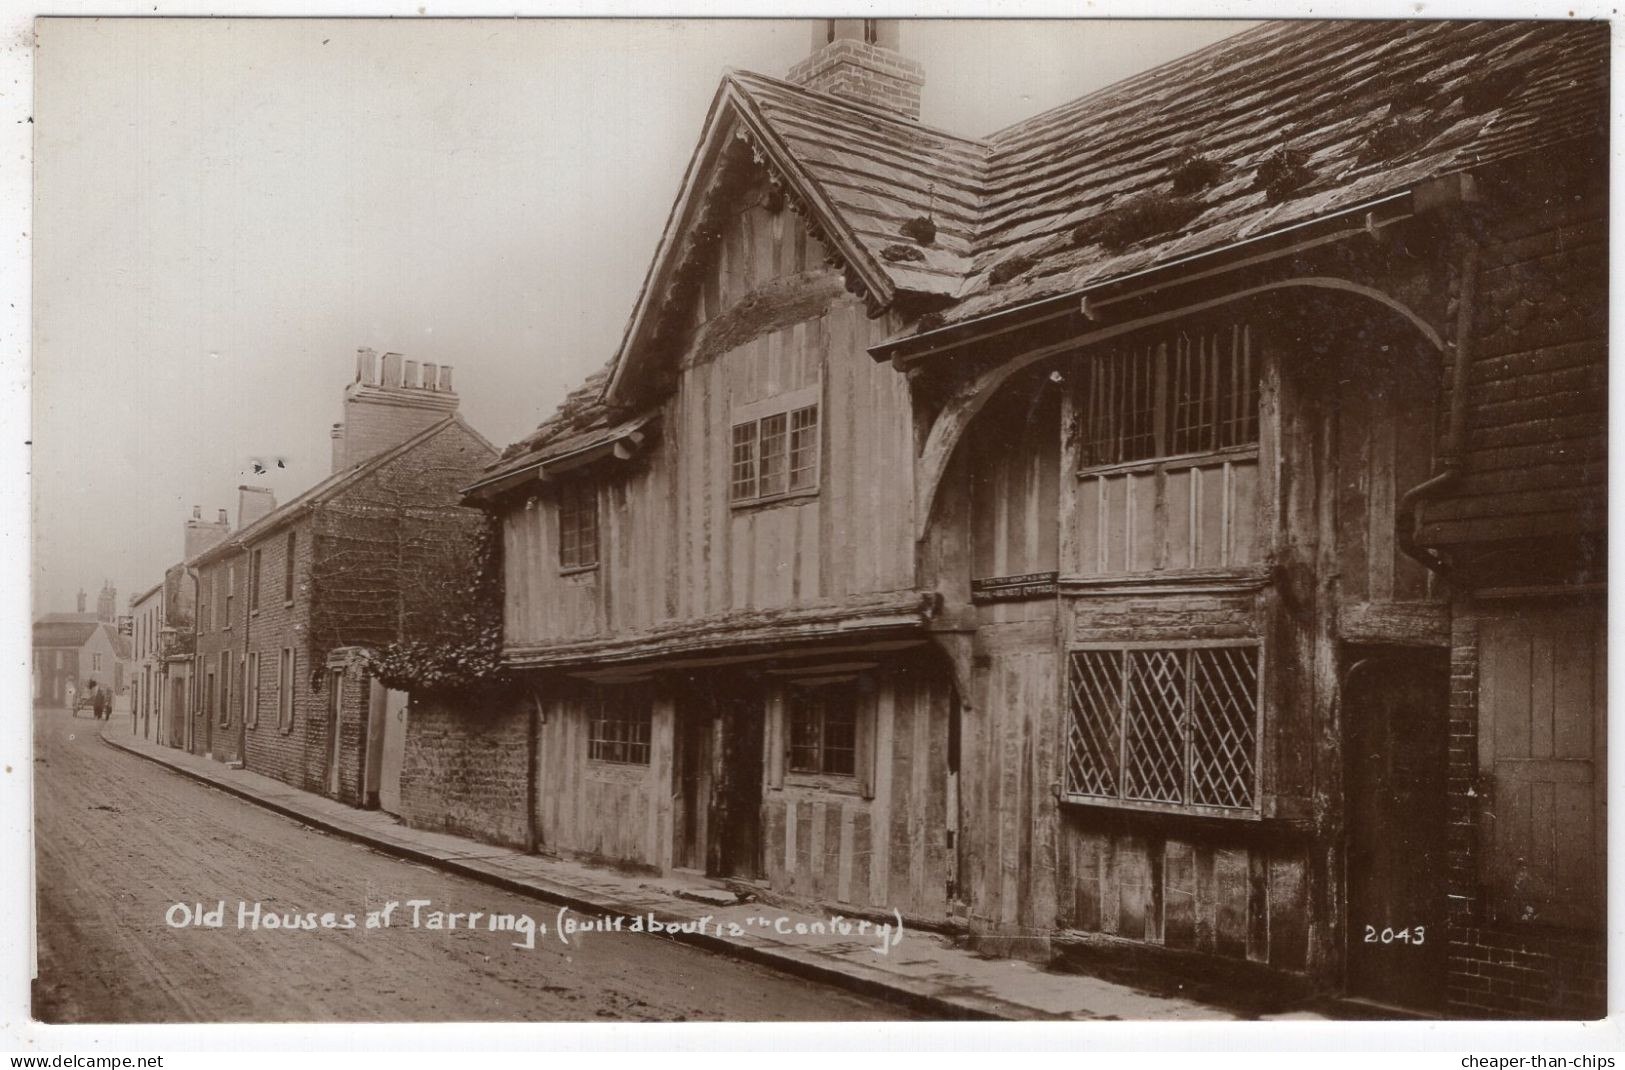 TARRING - Old House (built About 12th Century) - Photographic Card 2043 - Worthing